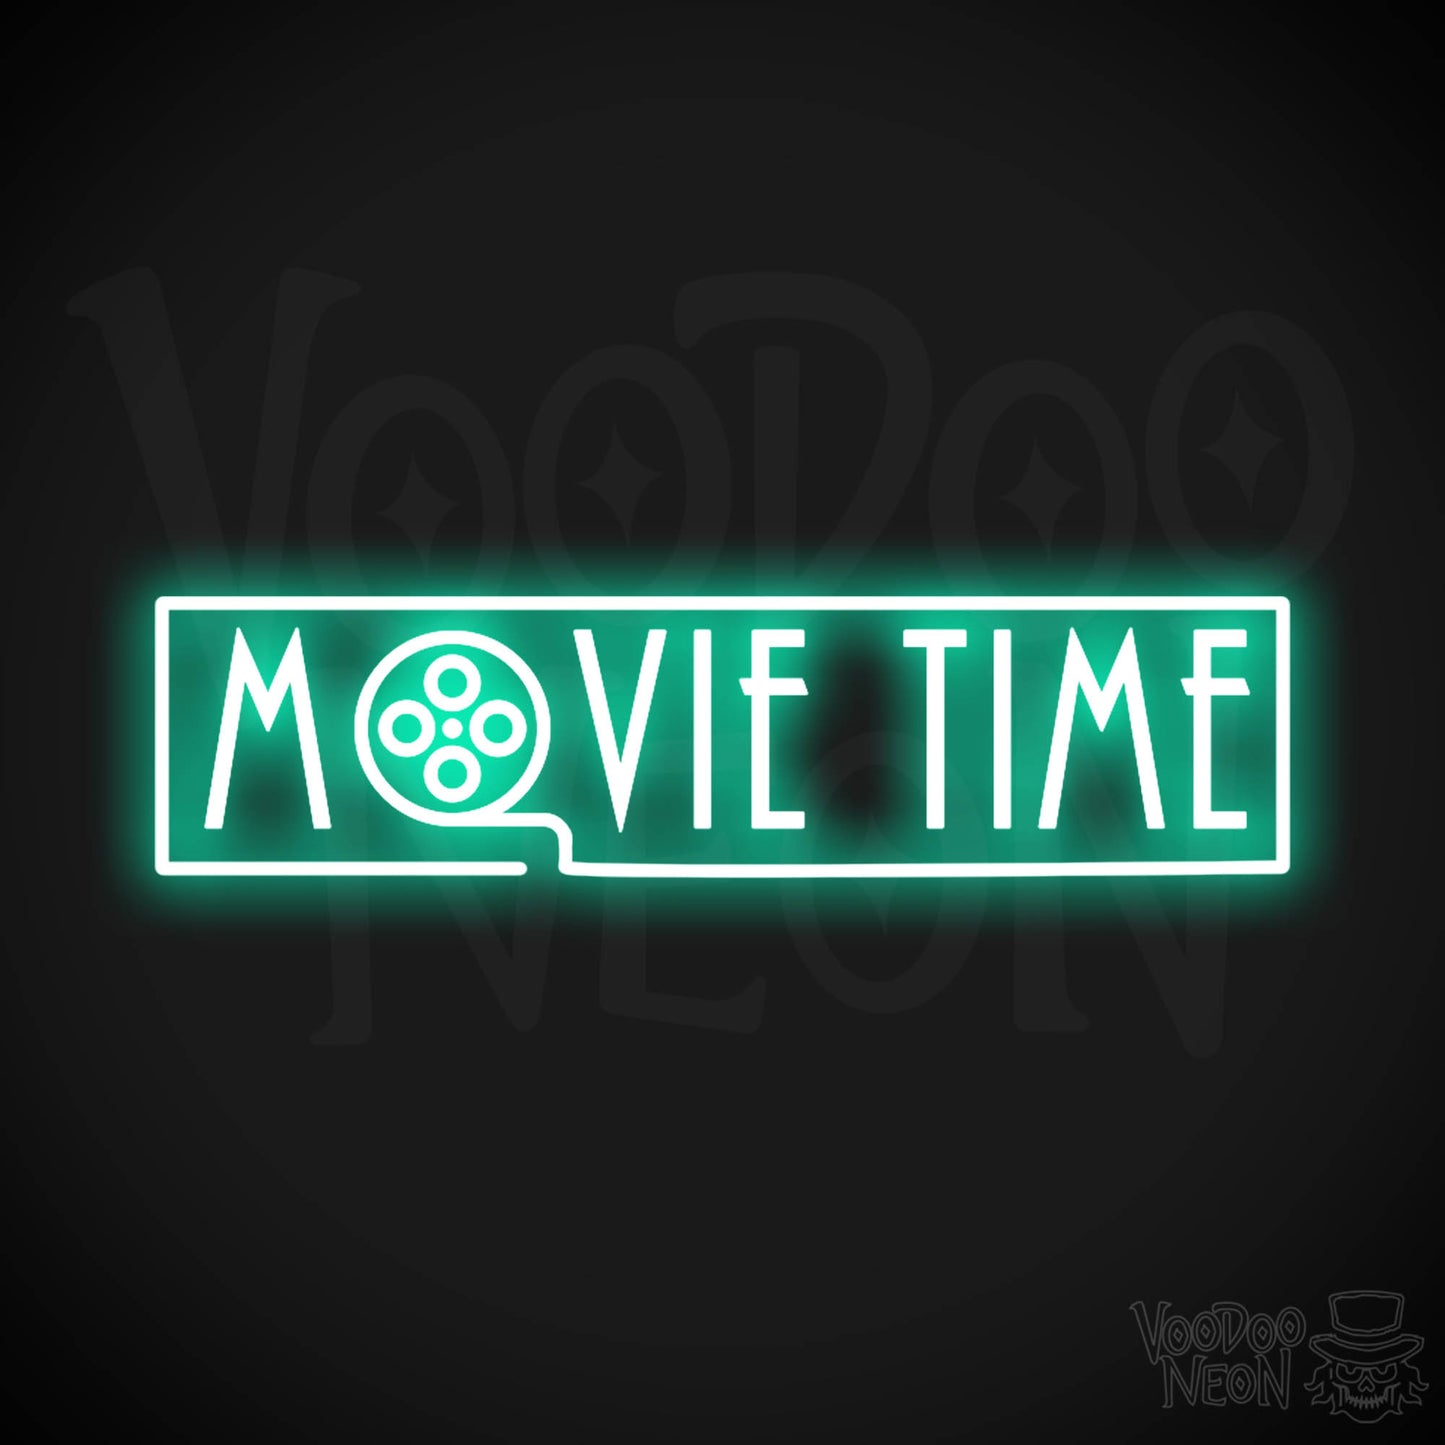 Movie Time Neon Sign - Neon Movie Time Sign - Color Light Green